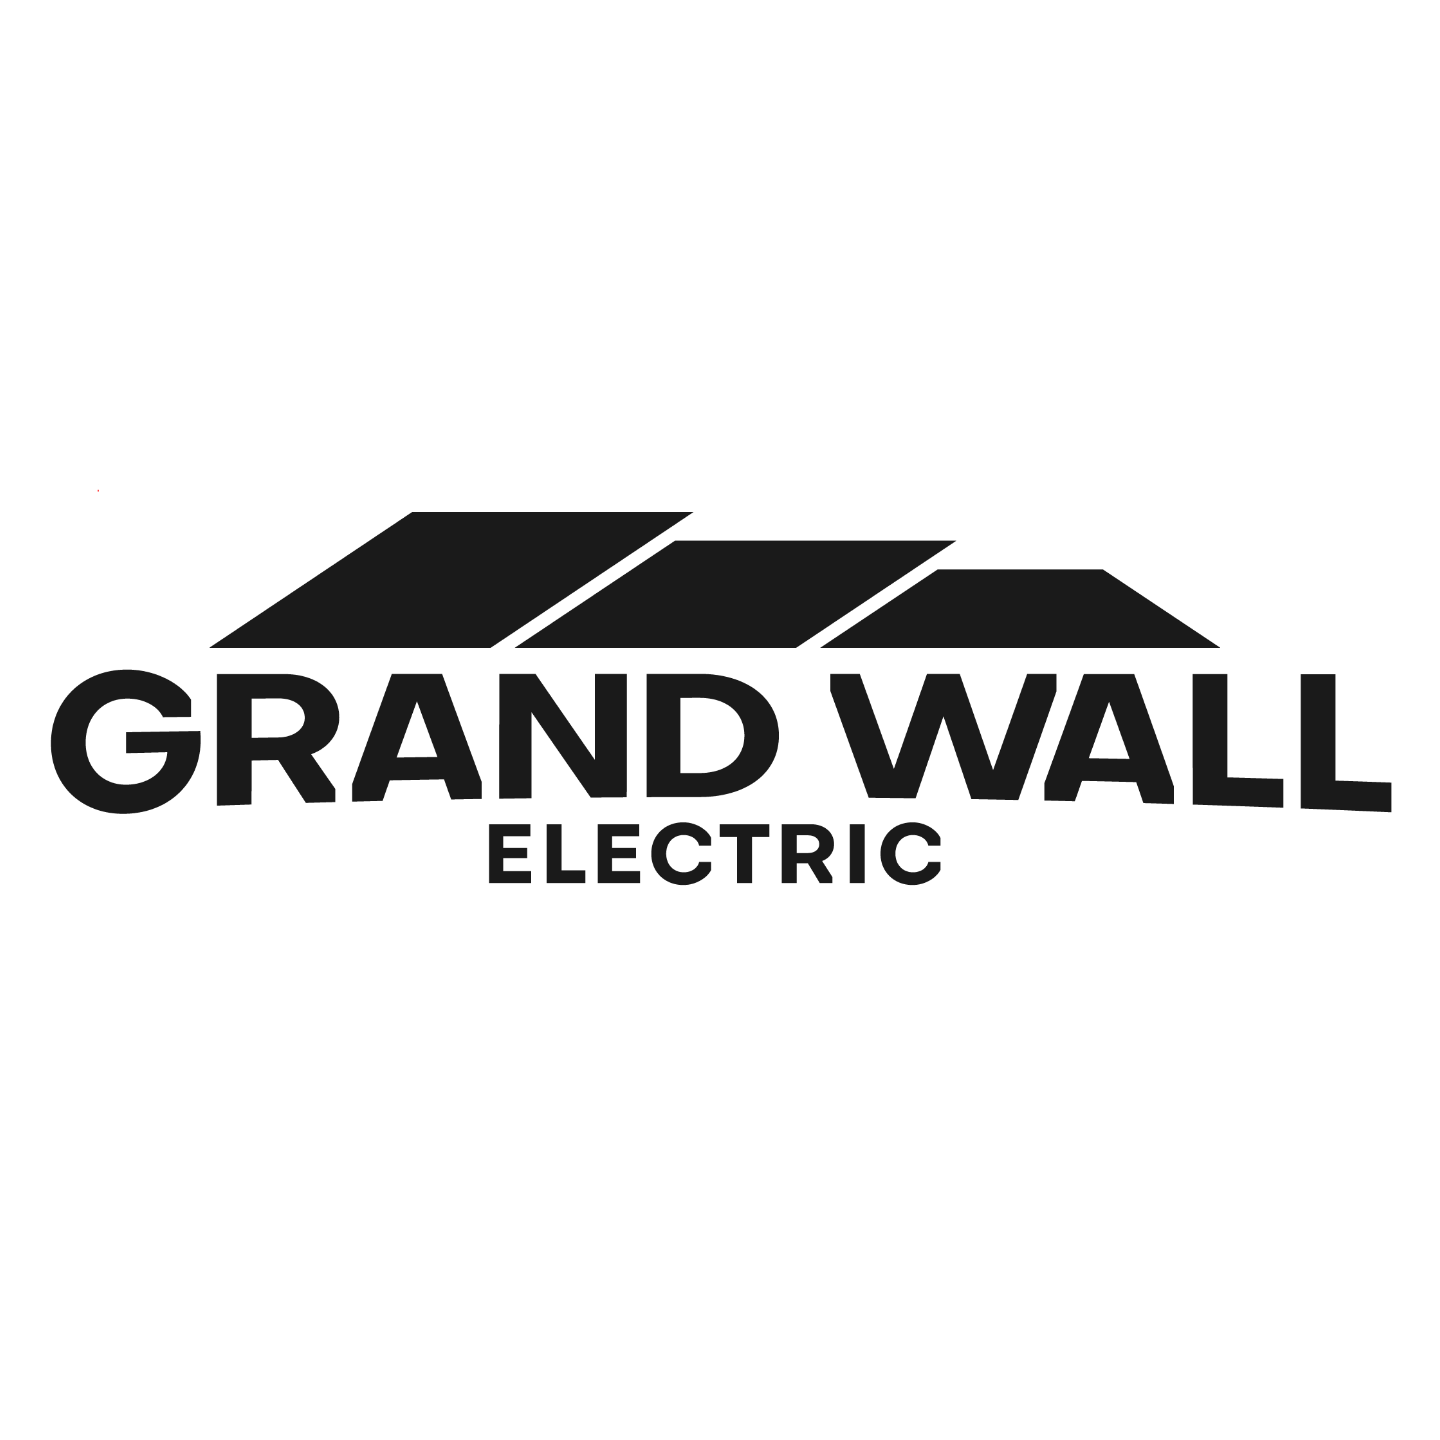 Grand Wall Electric